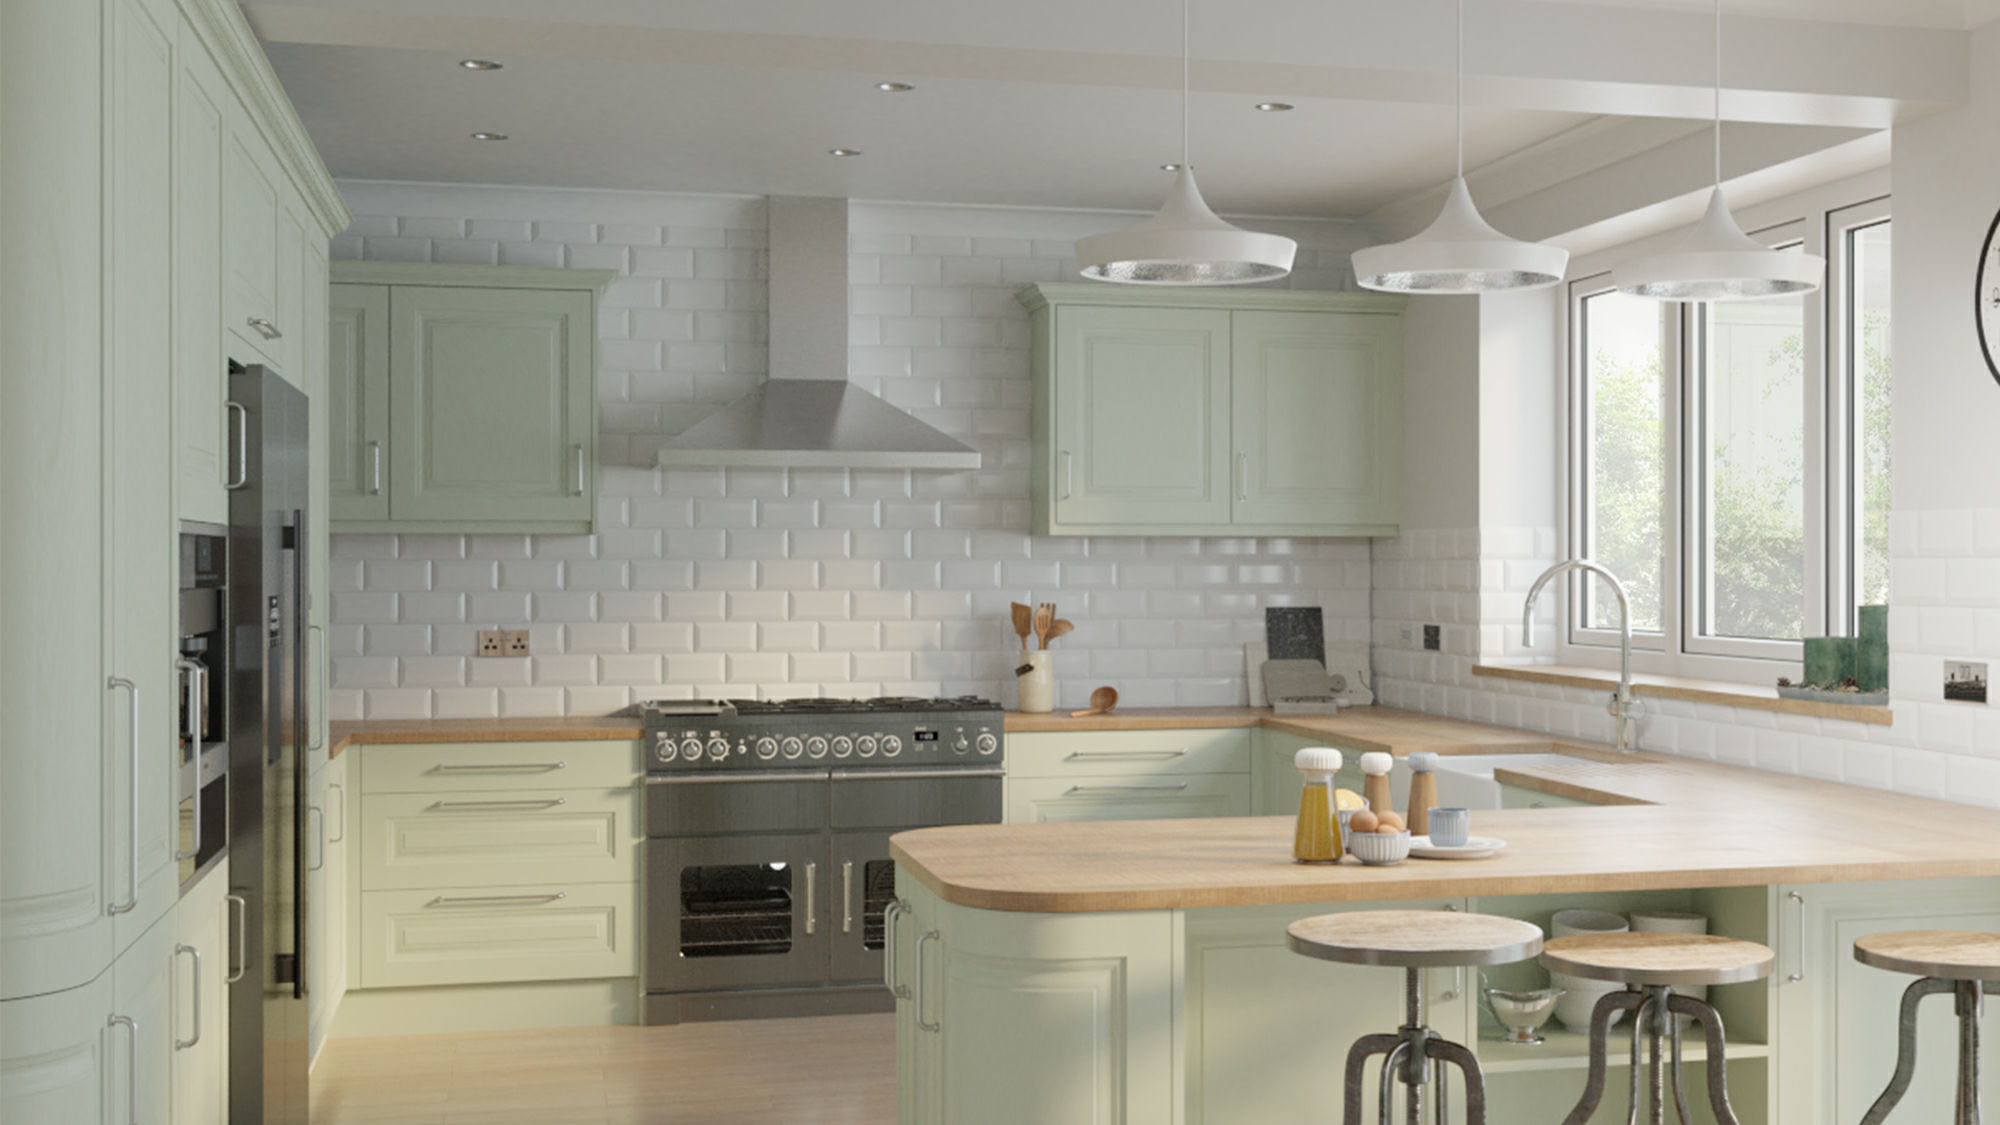 Jefferson Solid Wood Sage Green kitchens blending sturdy craftsmanship with the soft allure of sage green